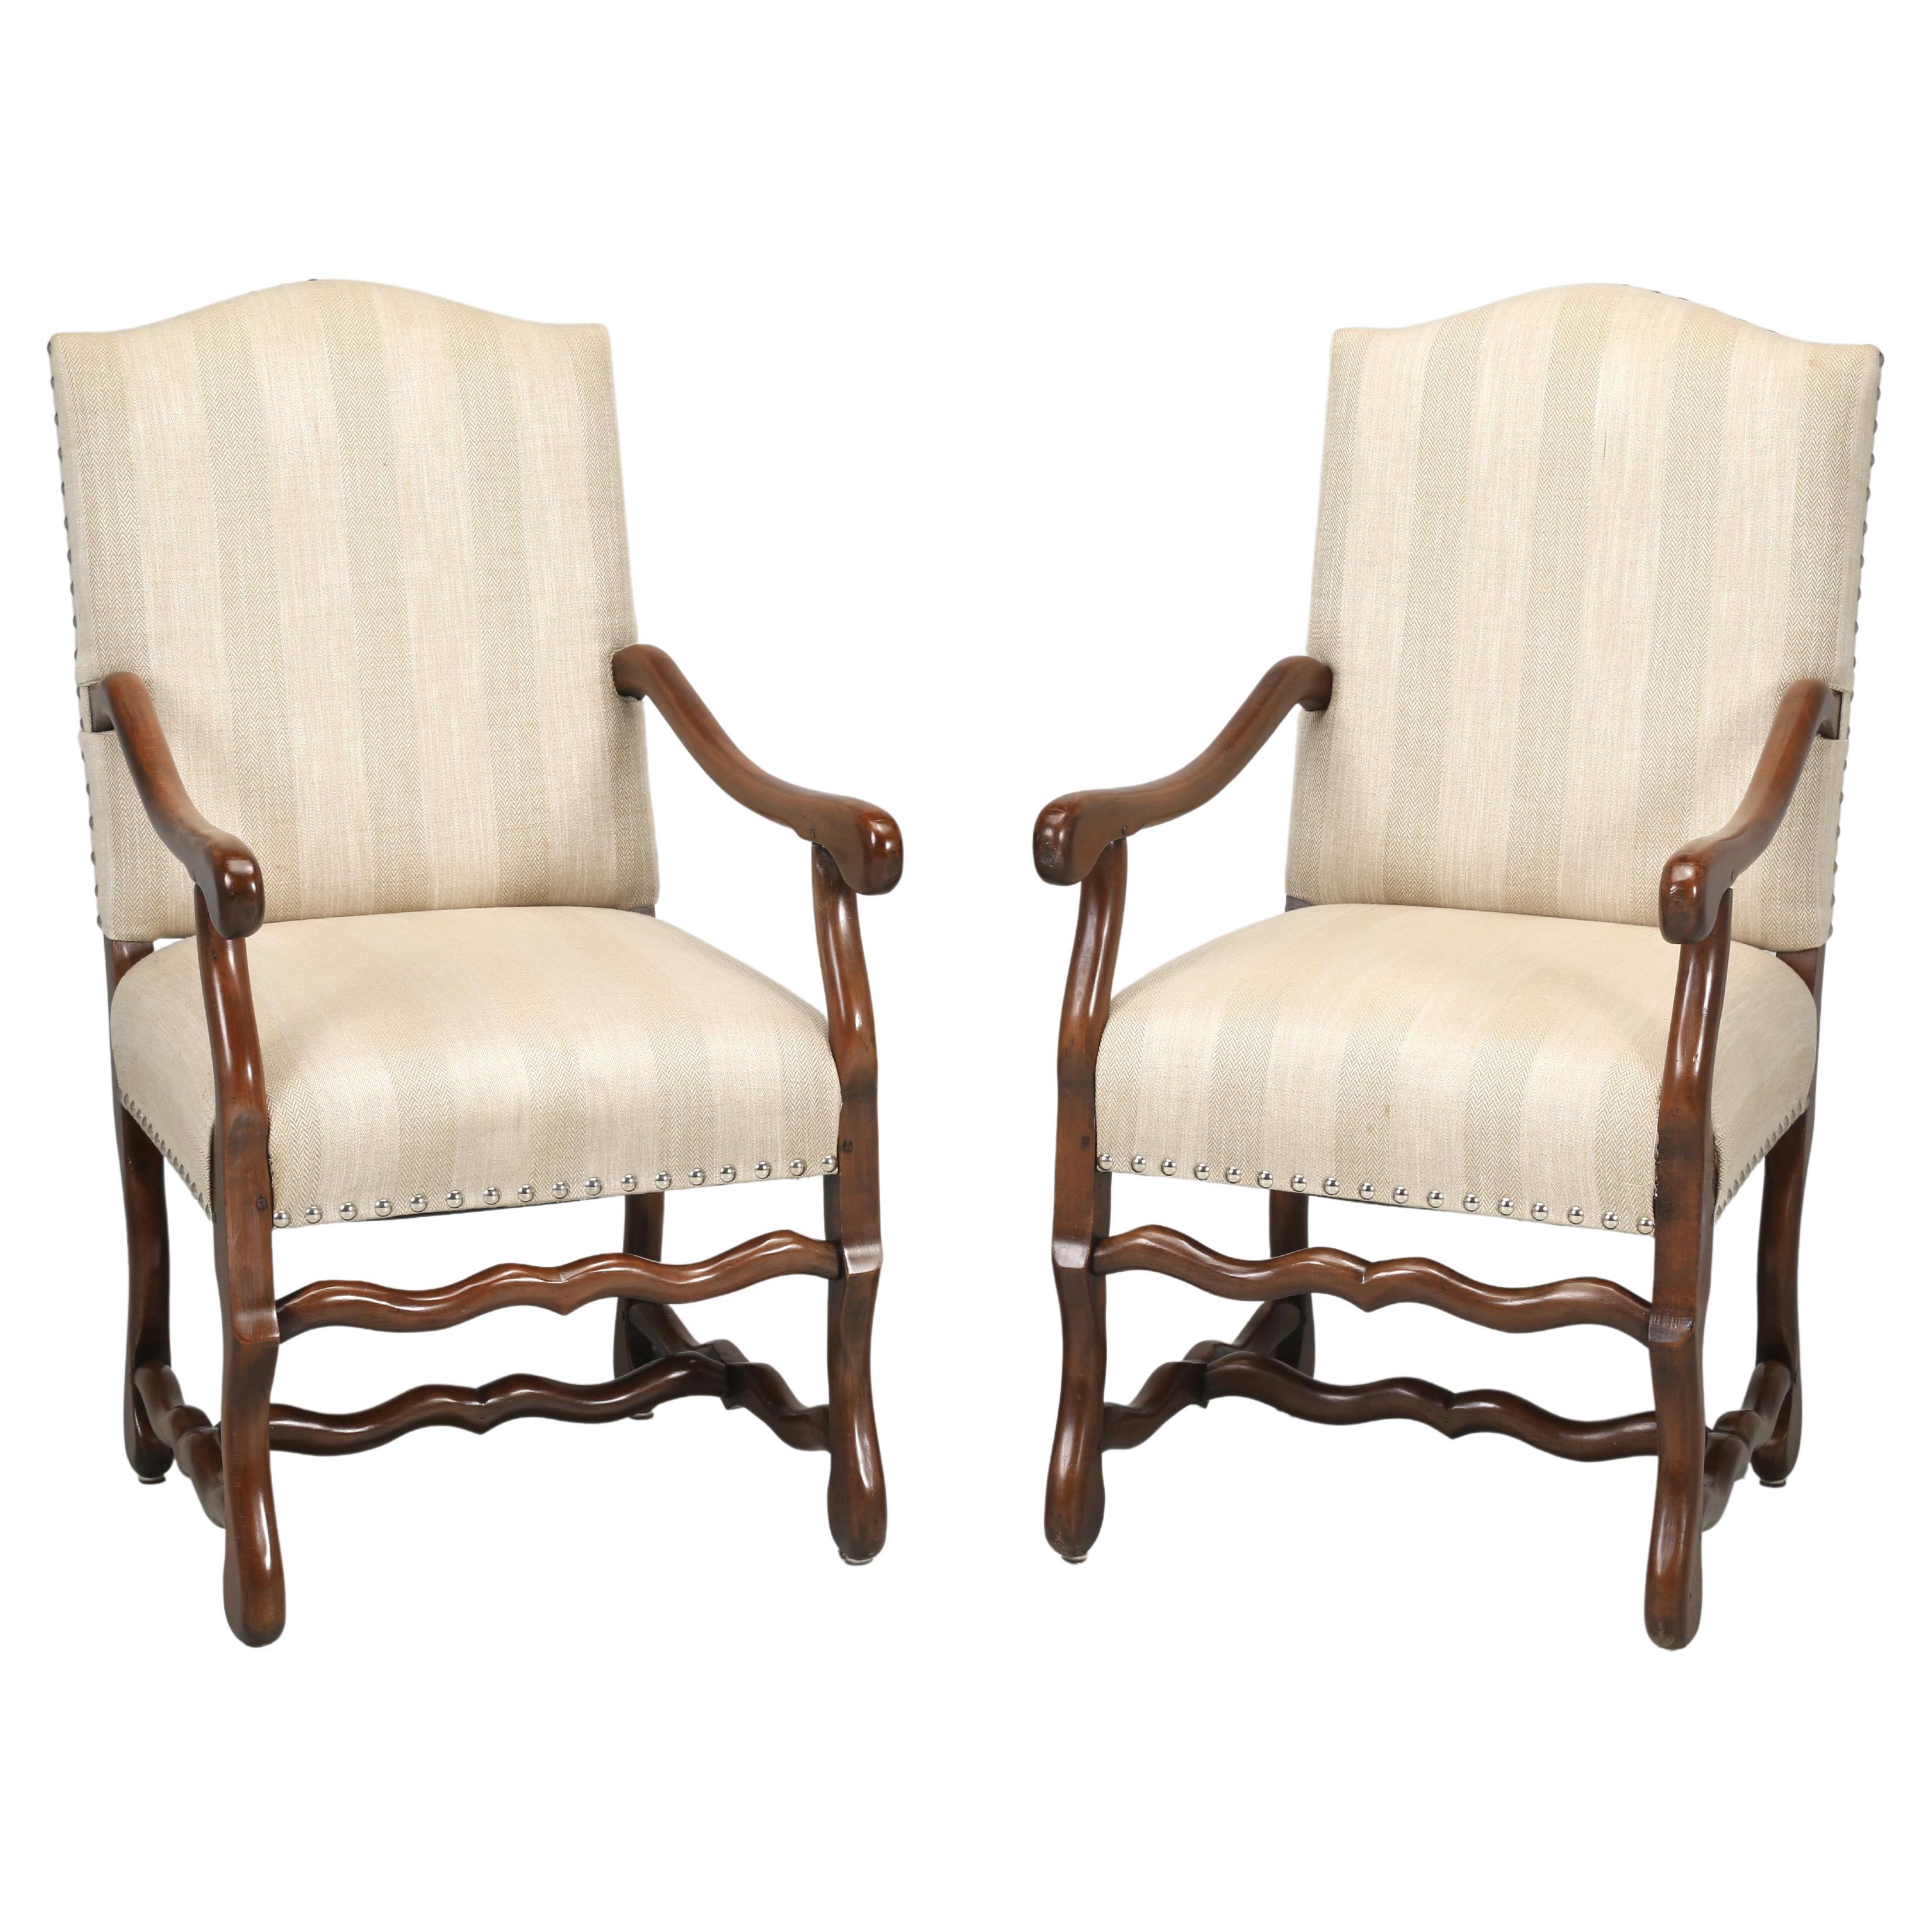 Antique Pair of French Os De Mouton Arm Chairs Restored Wood Peg Construction 